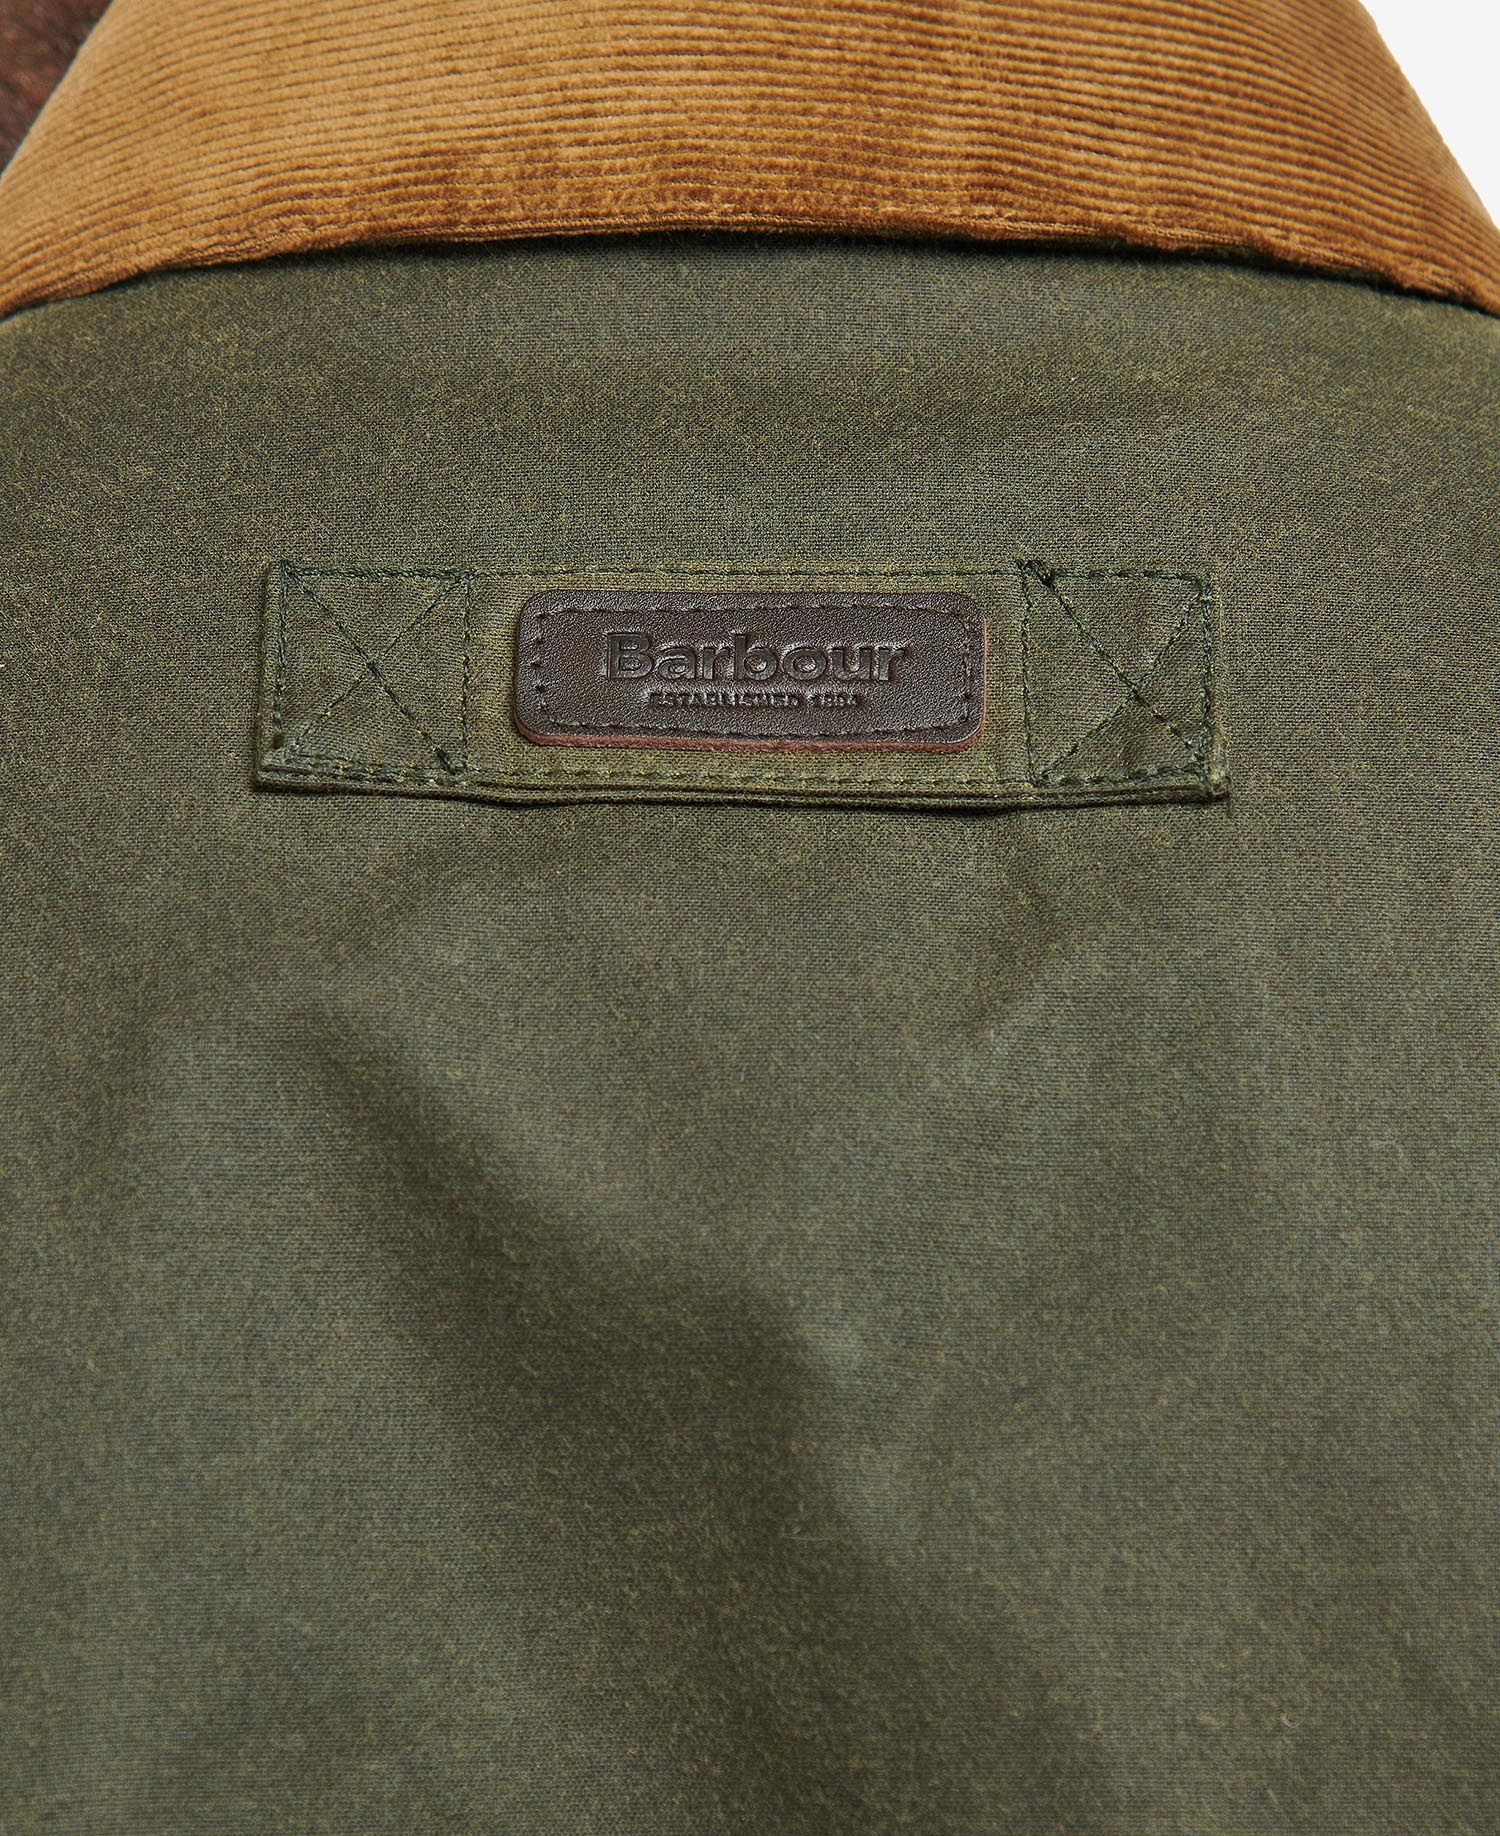 Shop the Barbour Milton Waxed Jacket today. | Barbour